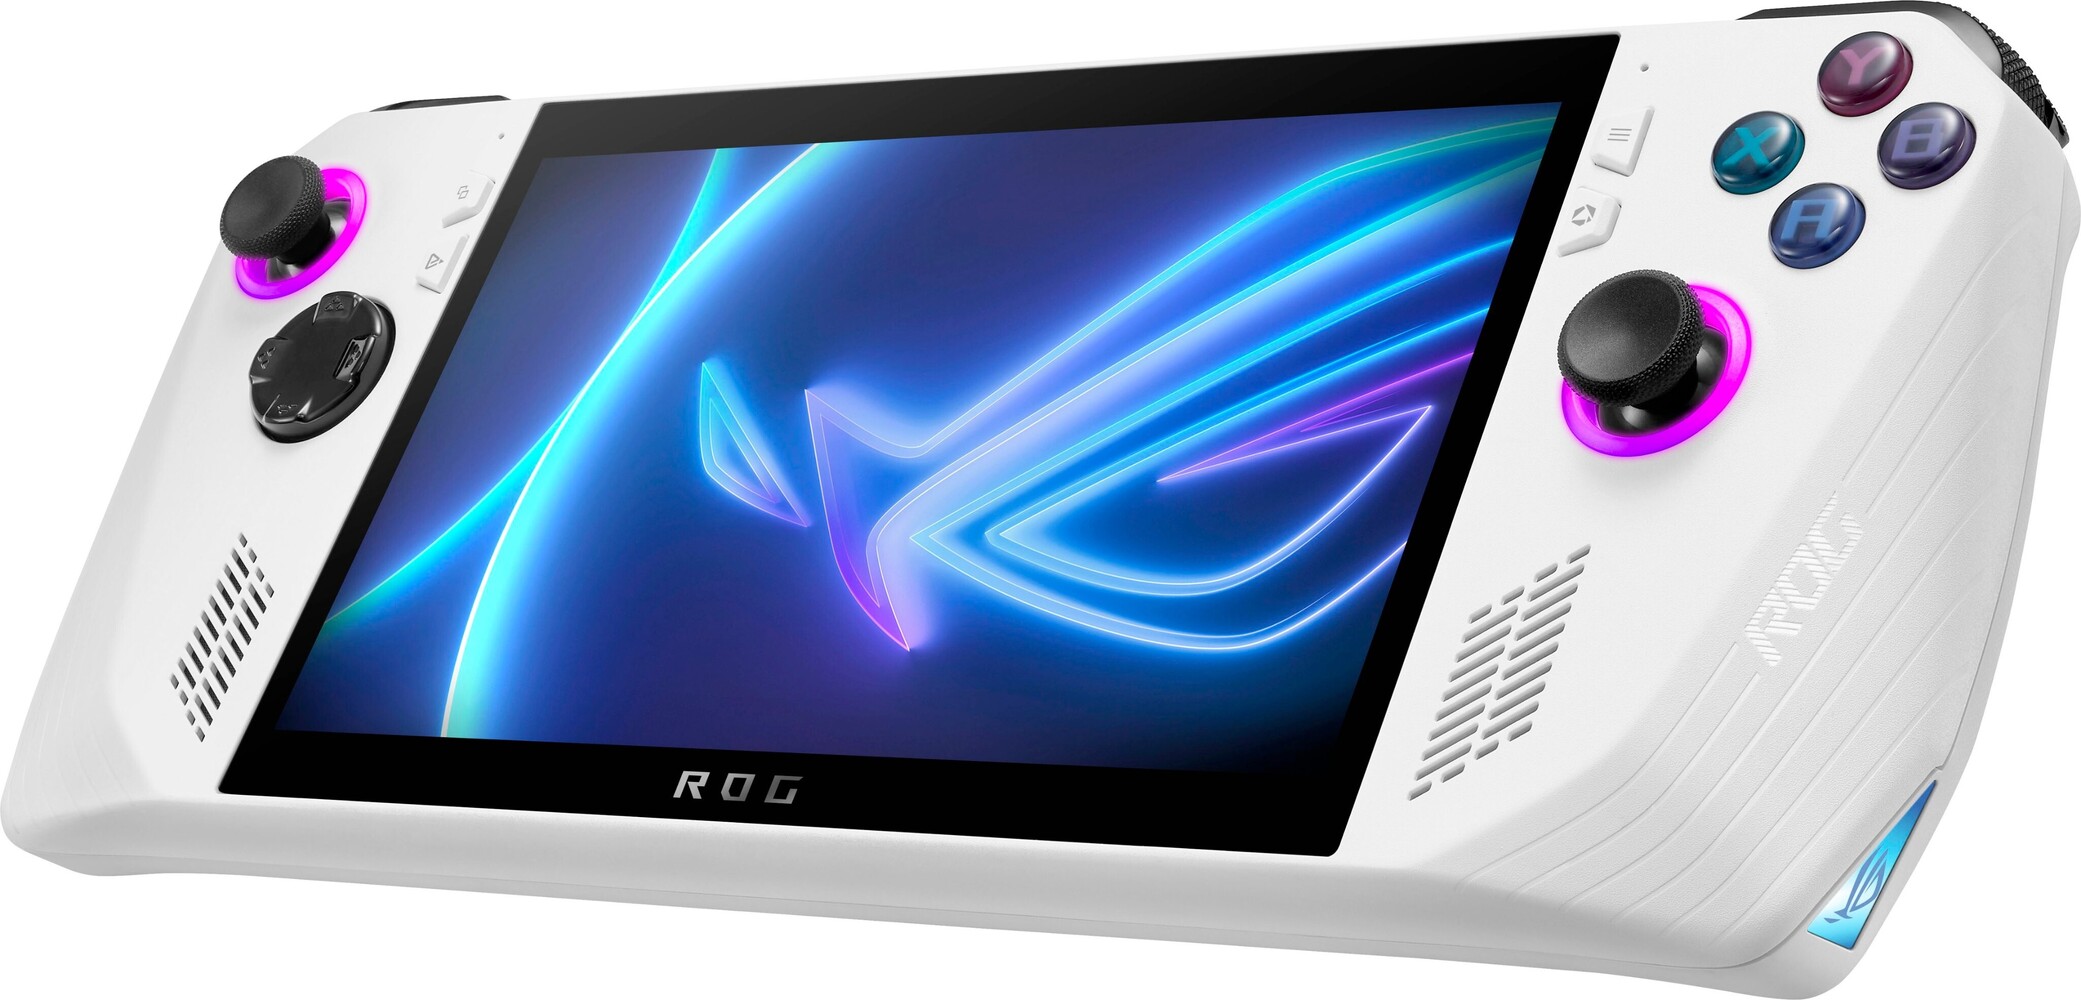 AMD Ryzen Z1 and Z1 Extreme APUs Debut in Asus ROG Ally Handheld